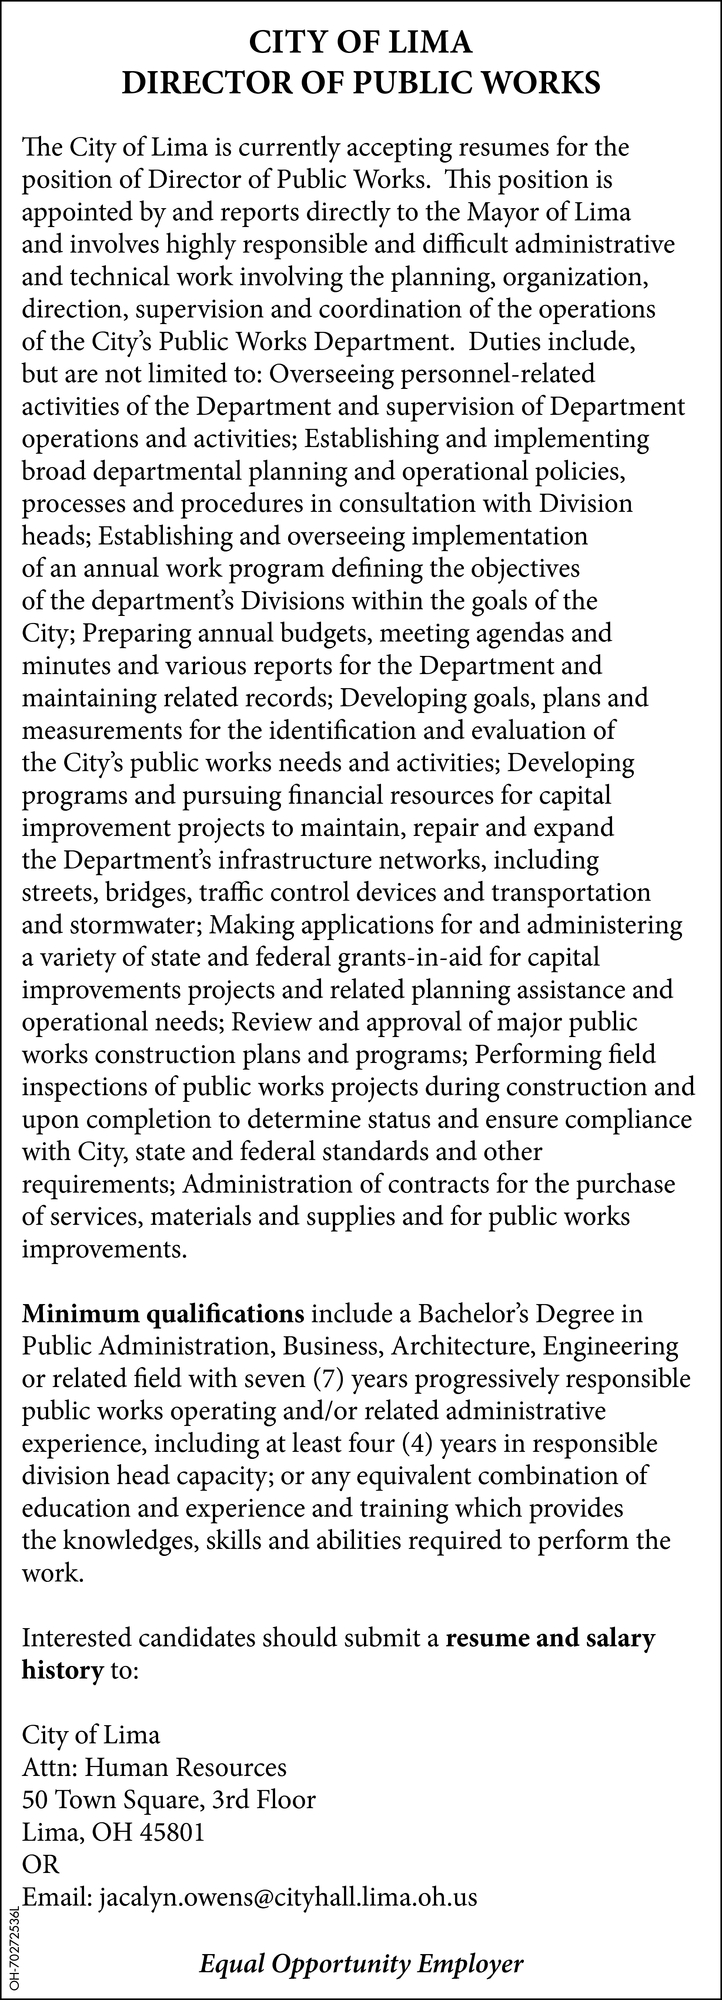 Director of Public Works